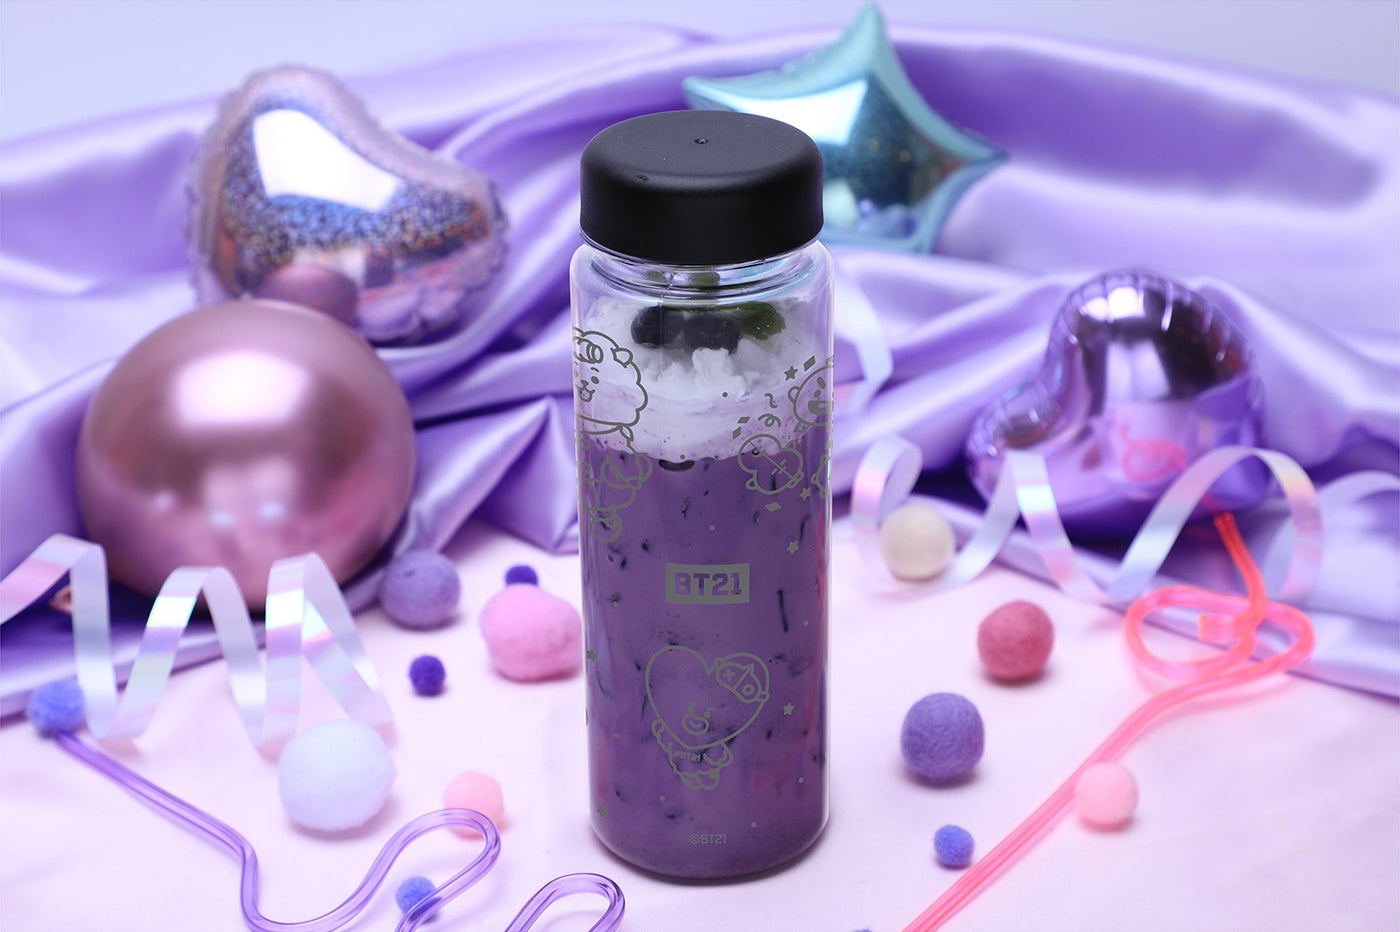 TAKEOUT DRINK　1,690円（C）BT21